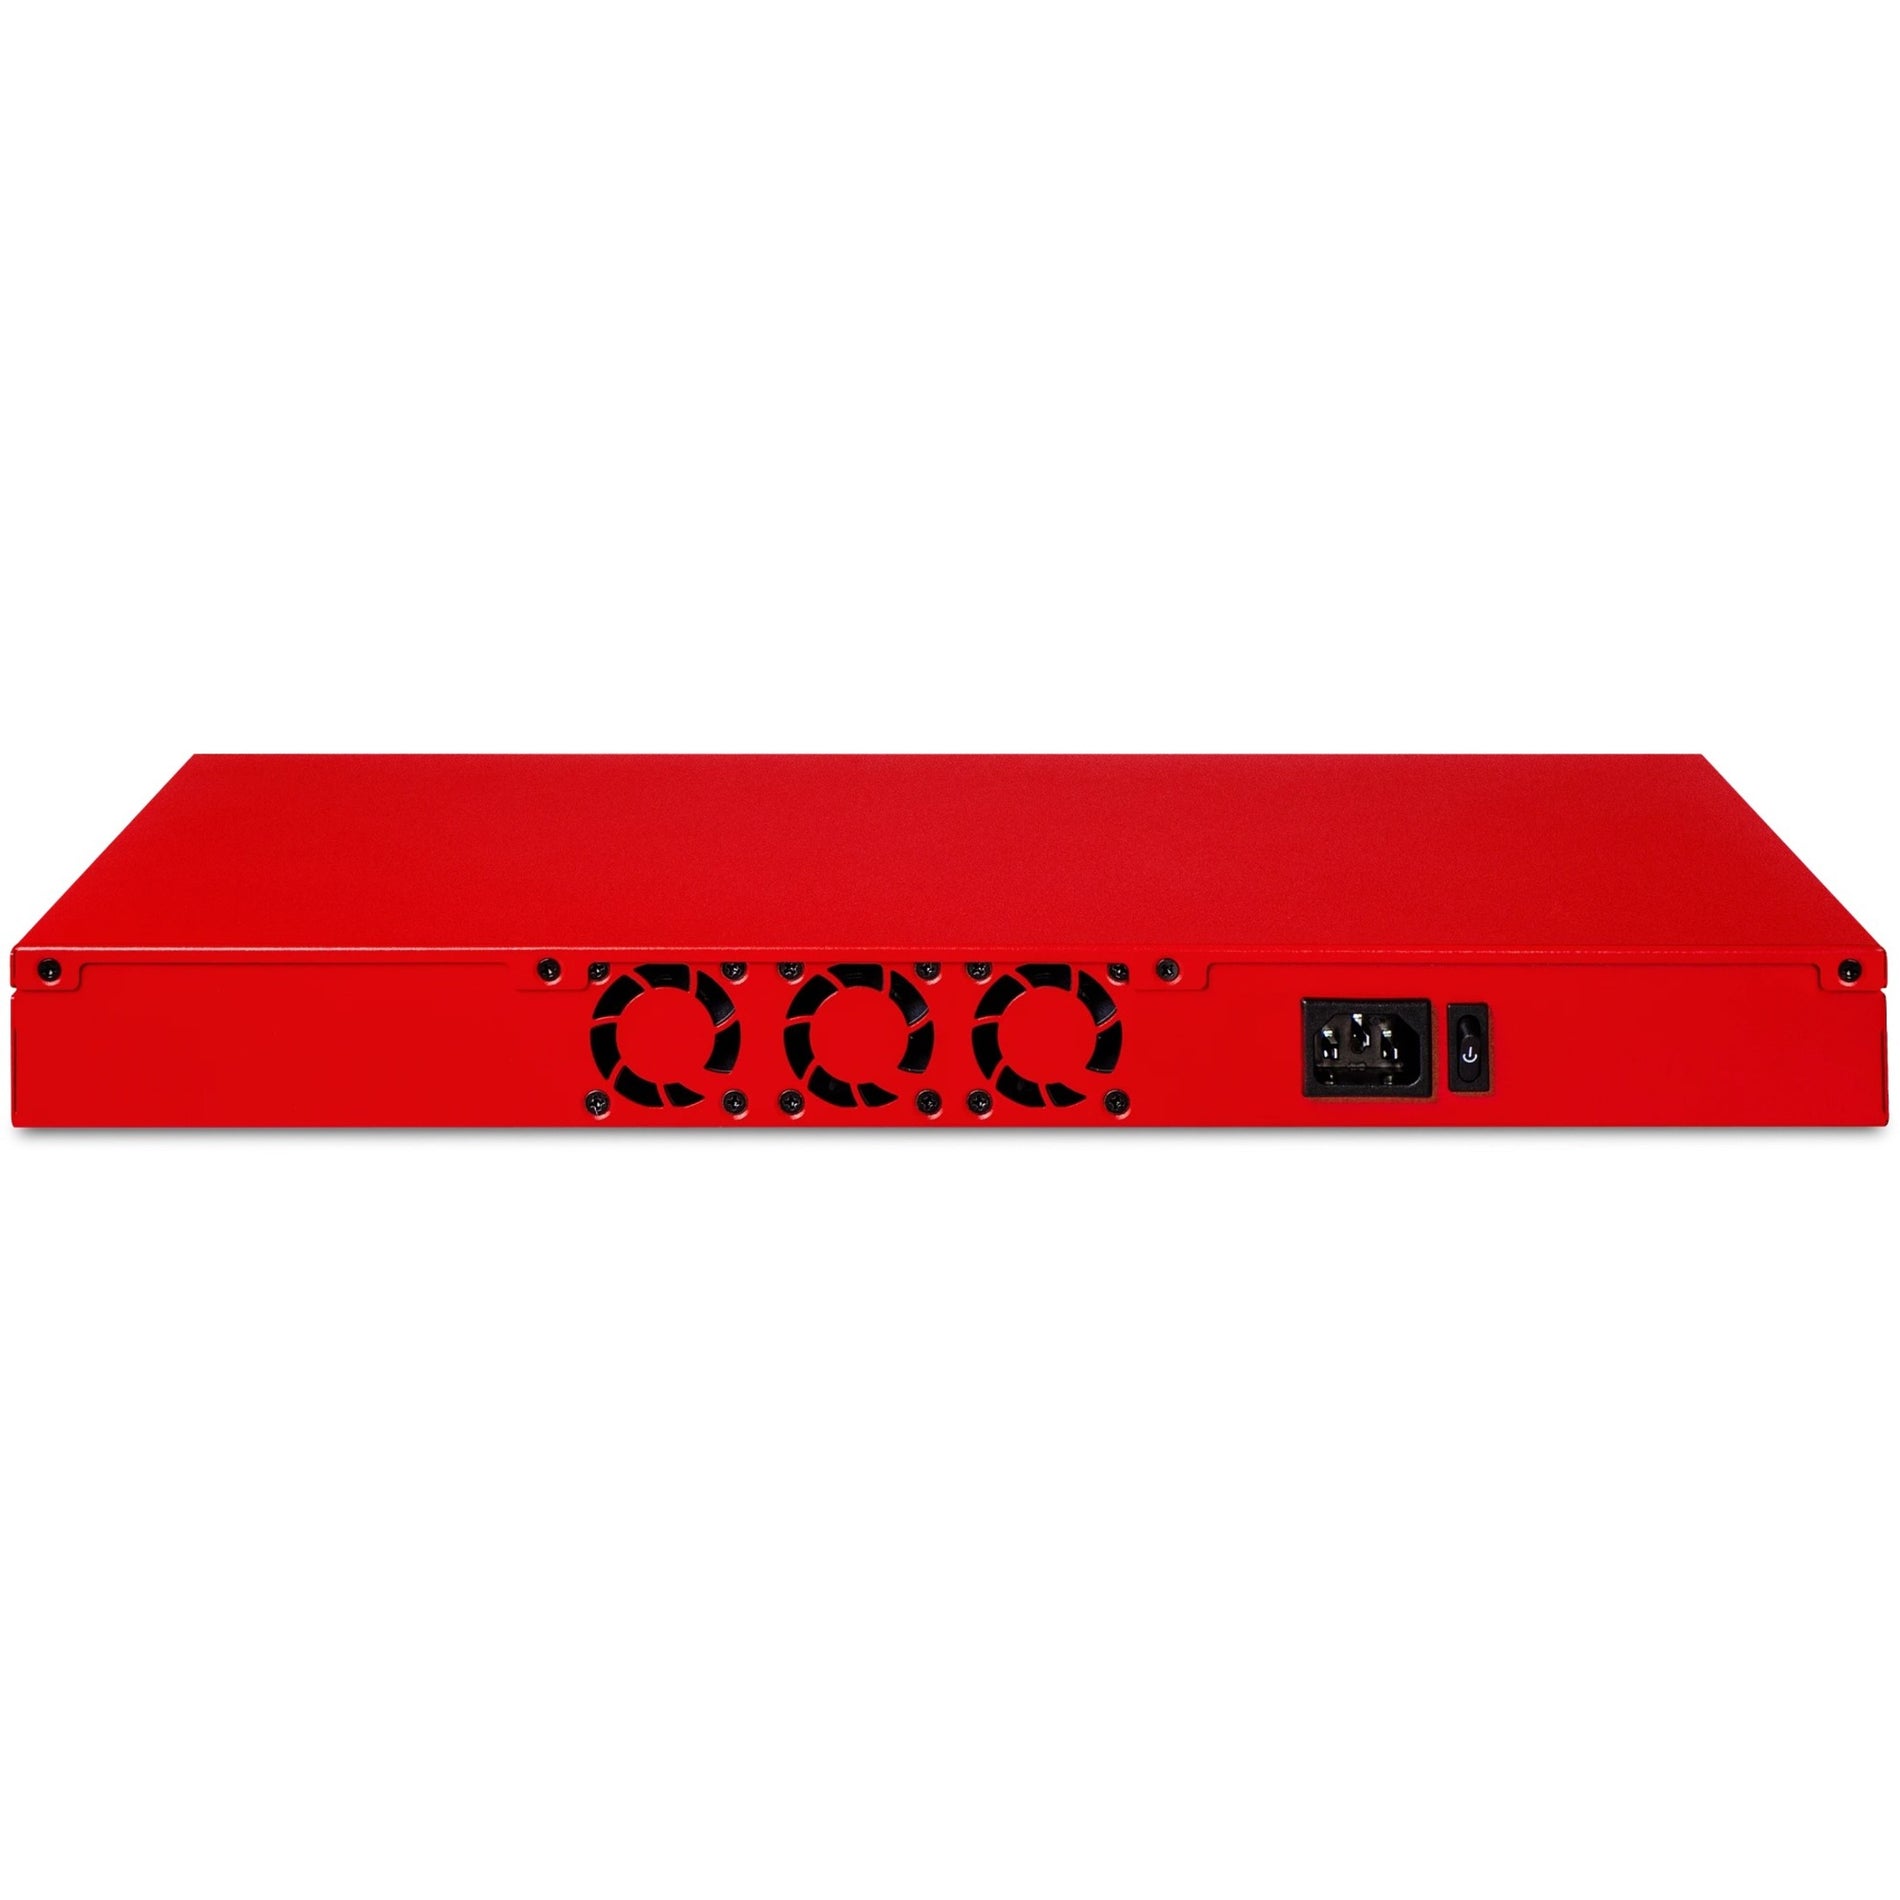 WatchGuard WGM39002101 Firebox M390 Network Security/Firewall Appliance, 8 Ports, 1 Year Total Security Suite